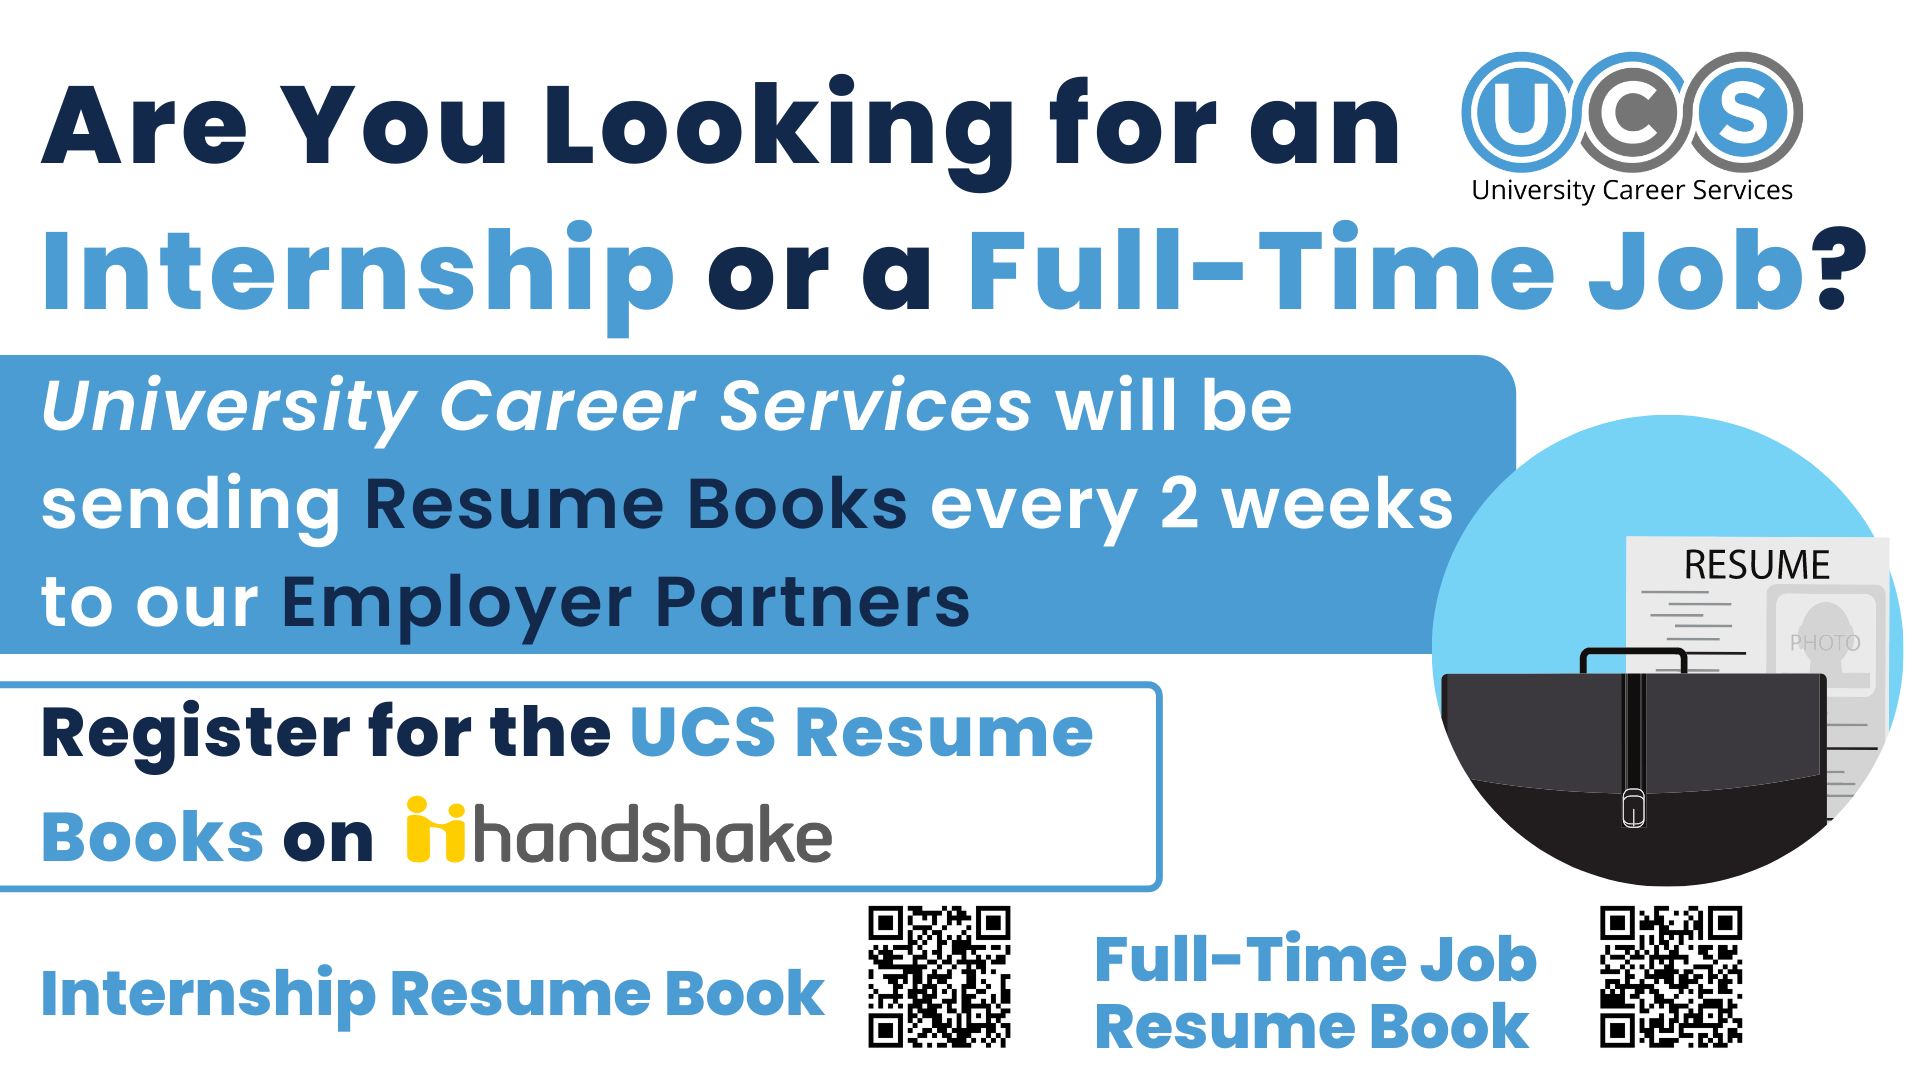 University Career Services will be sending Resume Books every 2 weeks to our Employer Partners